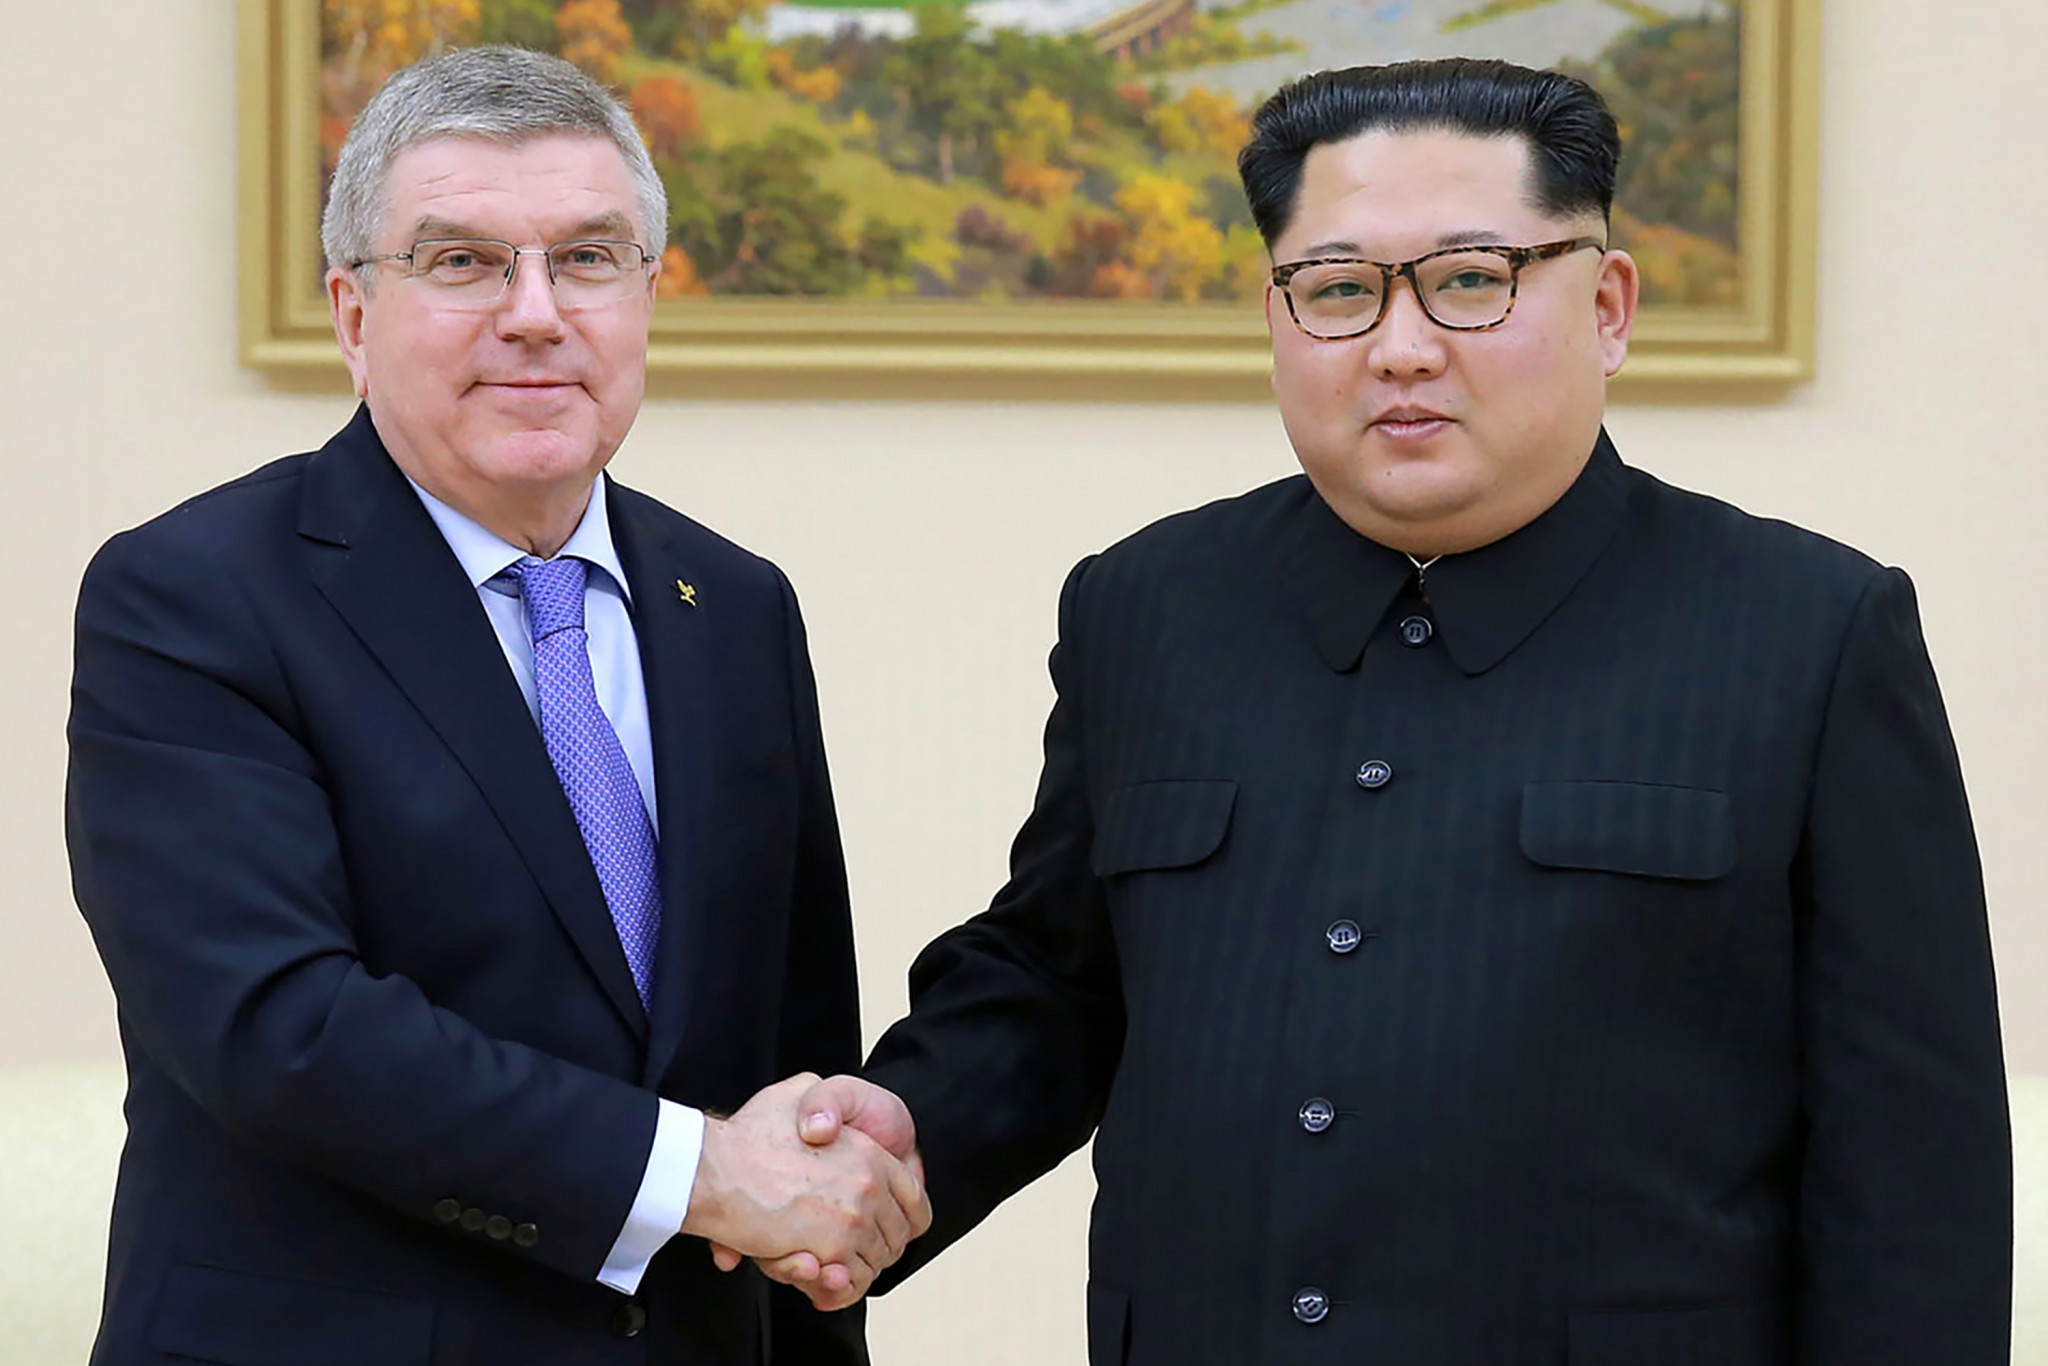 IOC President Thomas Bach, left, met with North Korea's Supreme Leader Kim Jong-un in Pyongyang last month ©Getty Images